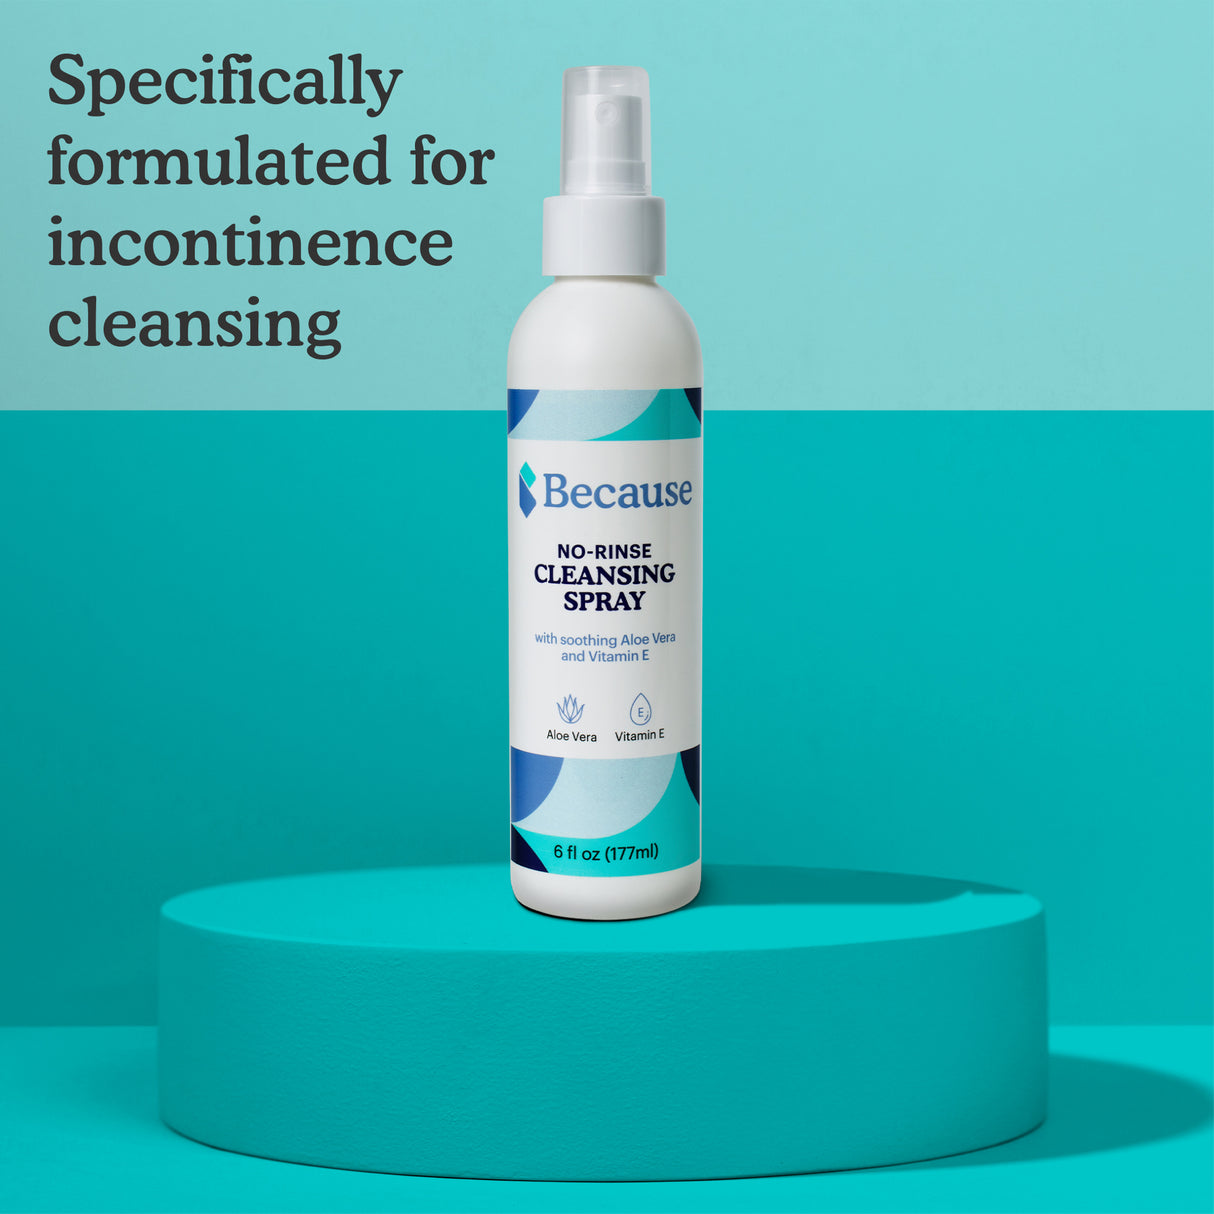 Specifically formulated for incontinence cleansing.